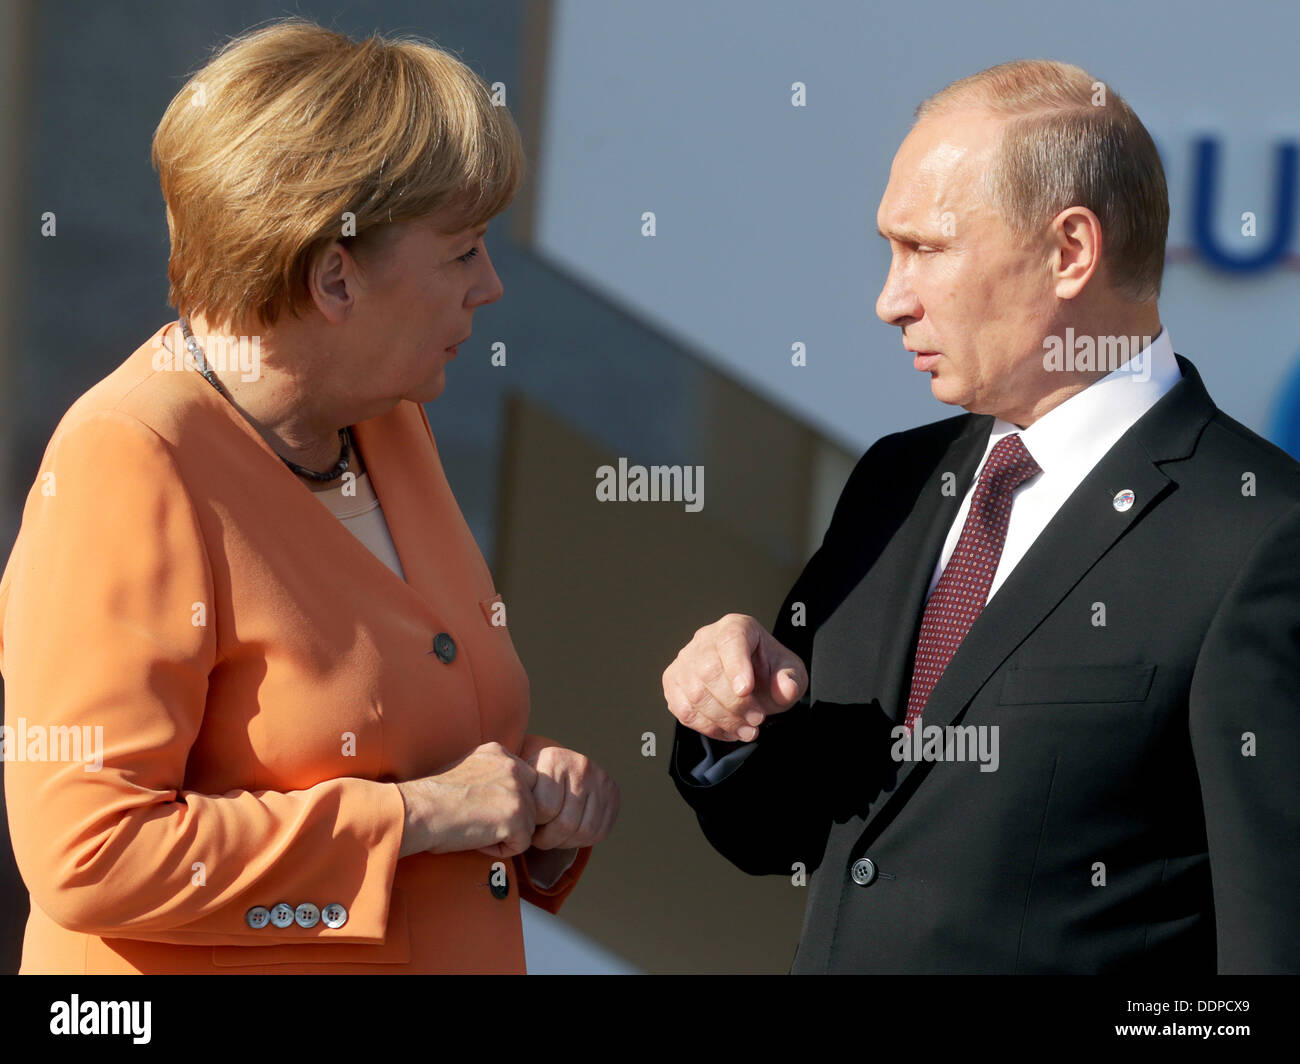 St. Petersburg, Russia. 05th Sep, 2013. Russian President Vladimir Putin welcomes German Chancellor Angela Merkel for the G20 summit at the Constantine Palace in St. Petersburg, Russia, 05 September 2013. The G20 summit takes place from 05 to 06 September. Photo: Kay Nietfeld/dpa/Alamy Live News Stock Photo